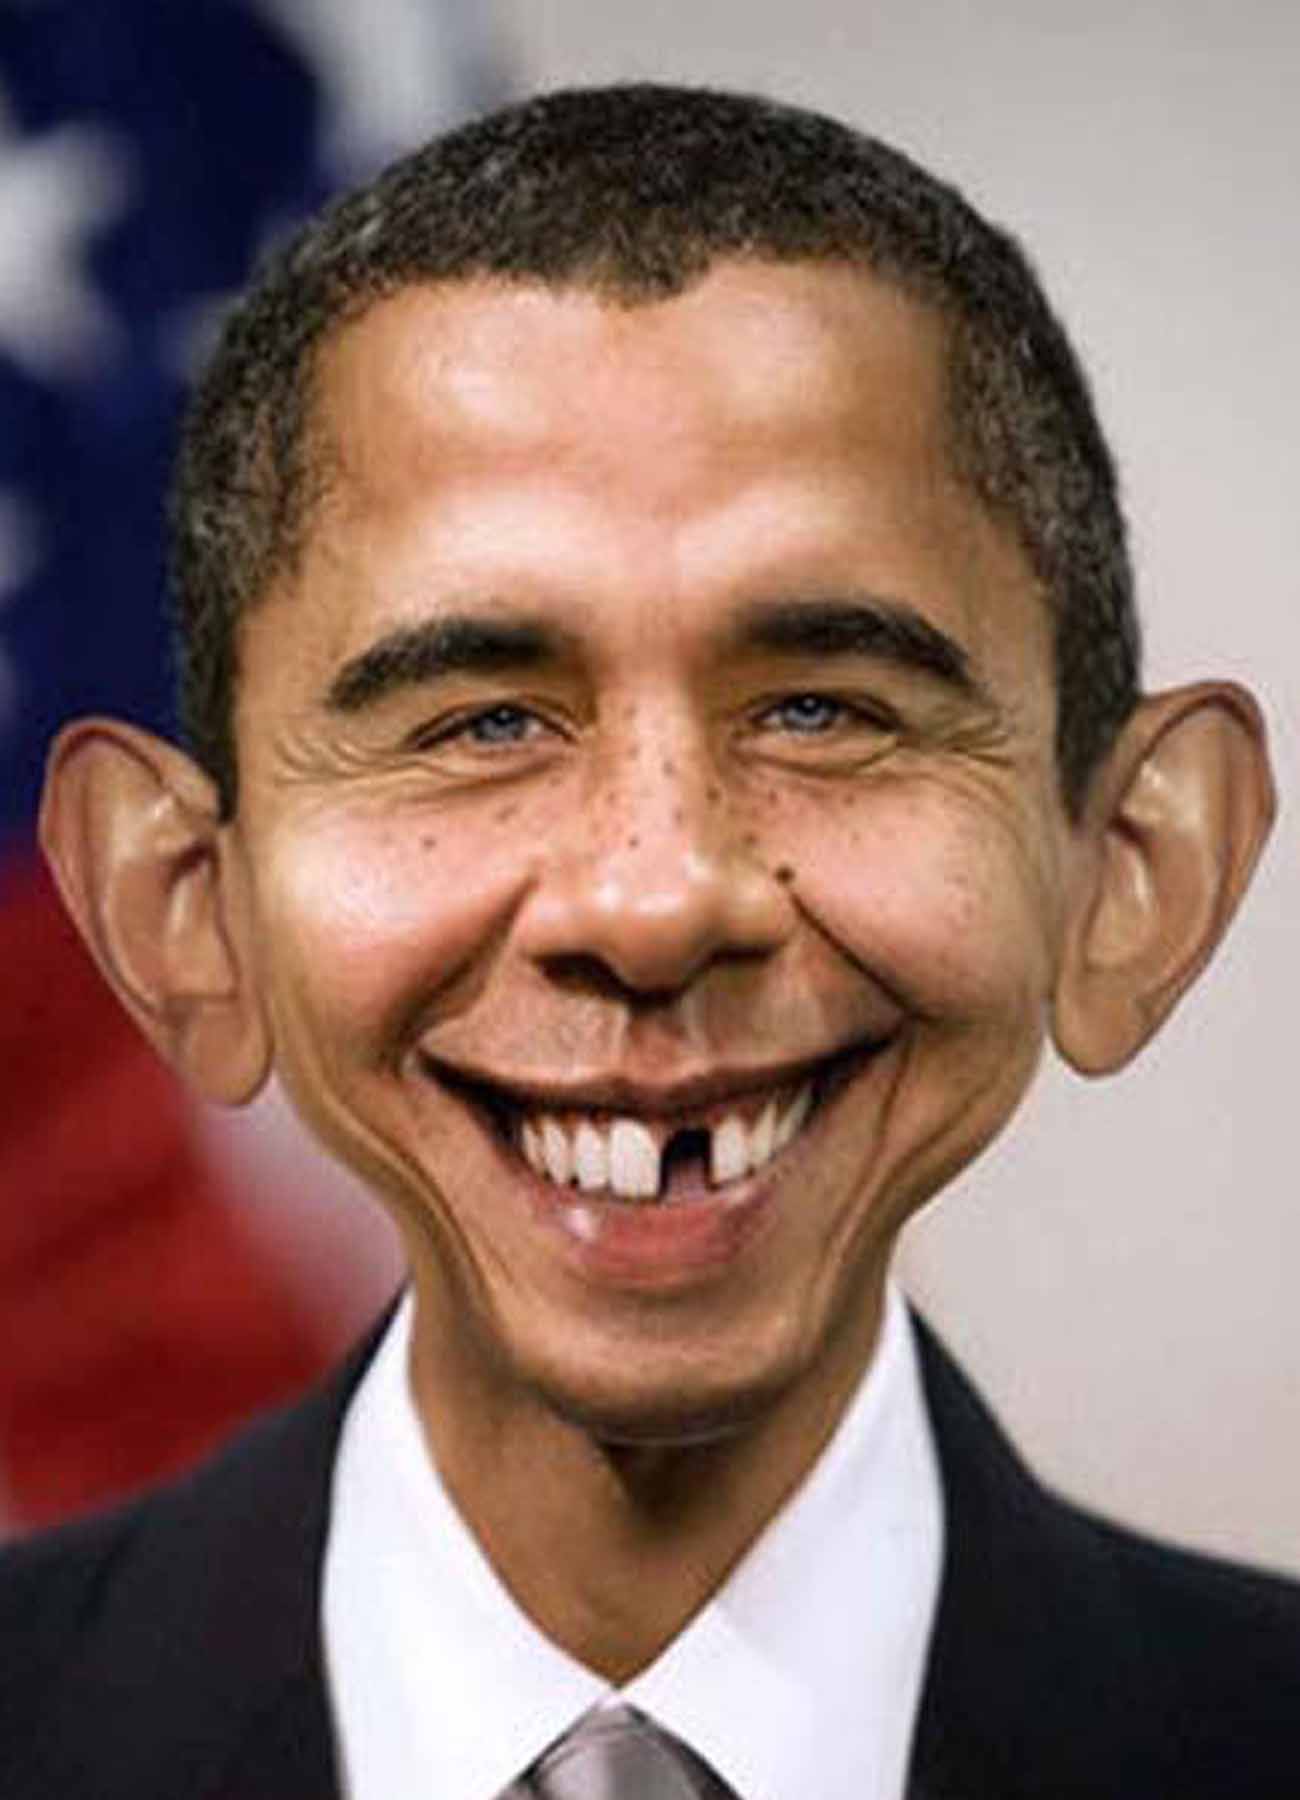 Obama With One Less Tooth Funny Face Picture